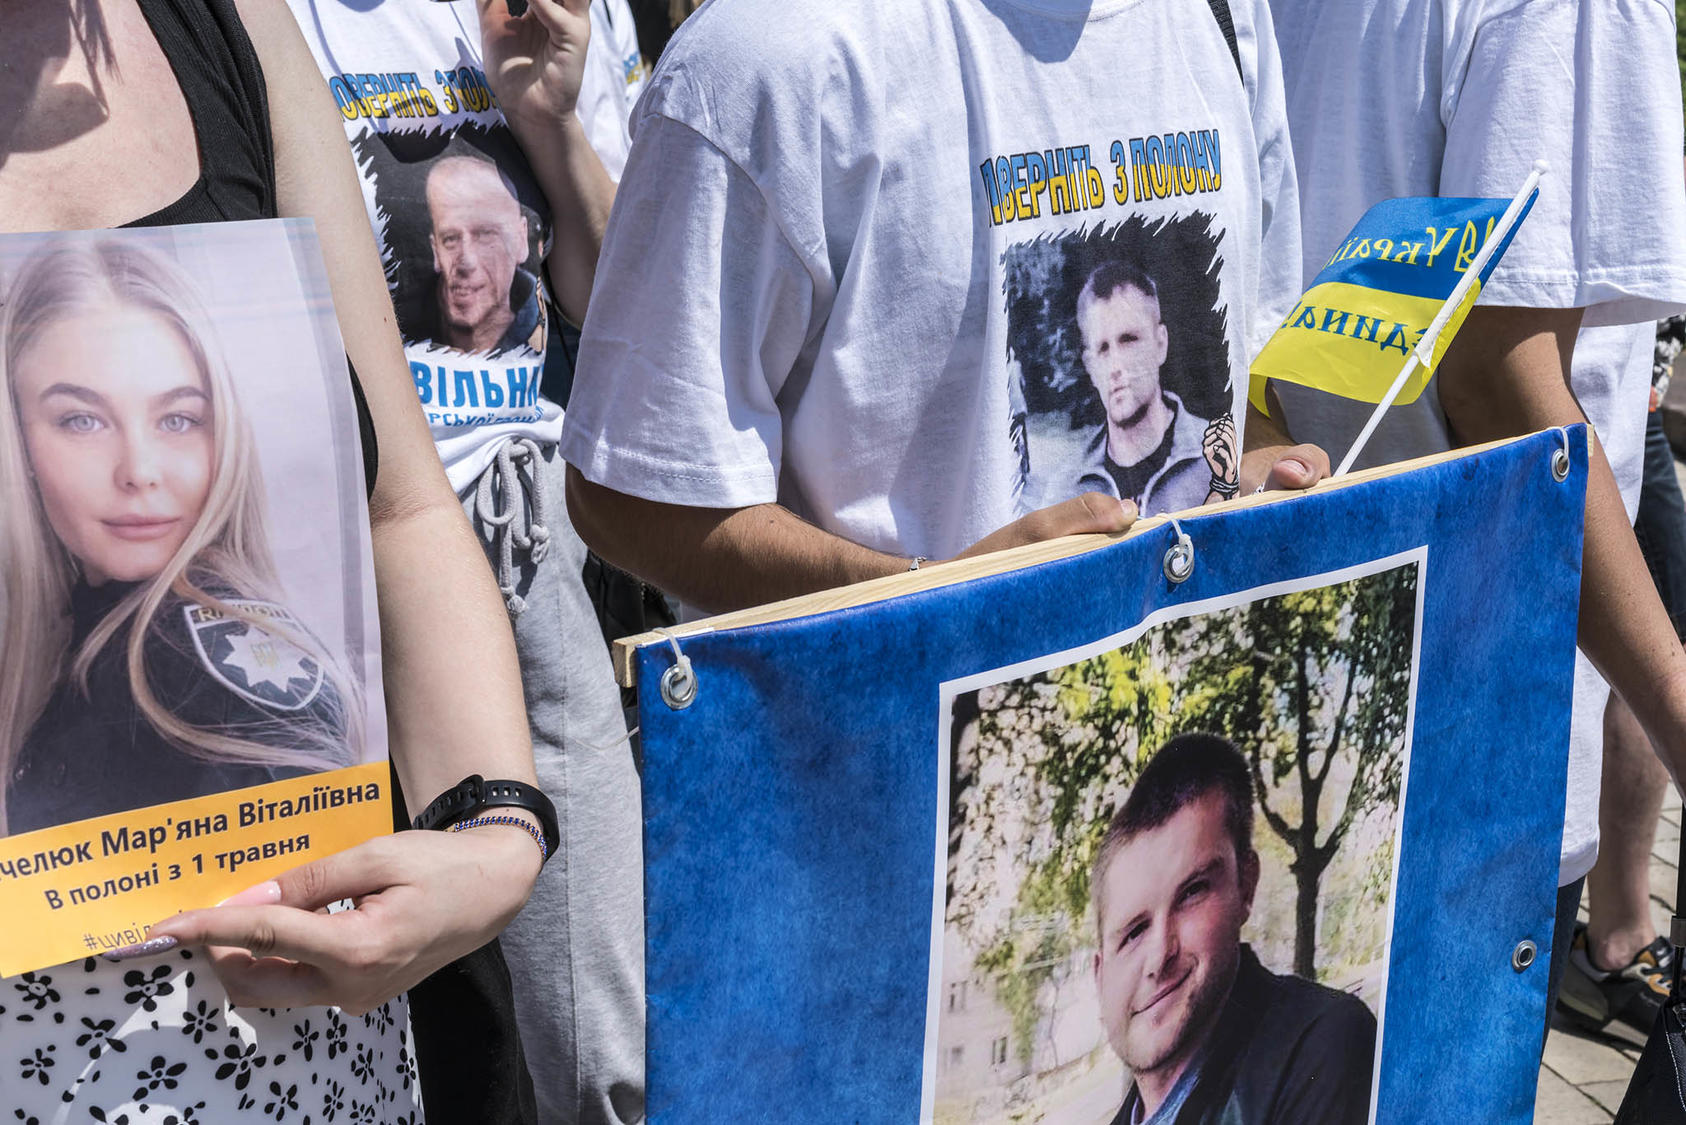 Protesters in Kyiv show portraits of Ukrainians, many civilians, seized by Russia in the war. As their army’s counteroffensive has begun, Ukrainians say their will to resist Russian rule has only grown over the war. (Brendan Hoffman/The New York Times)